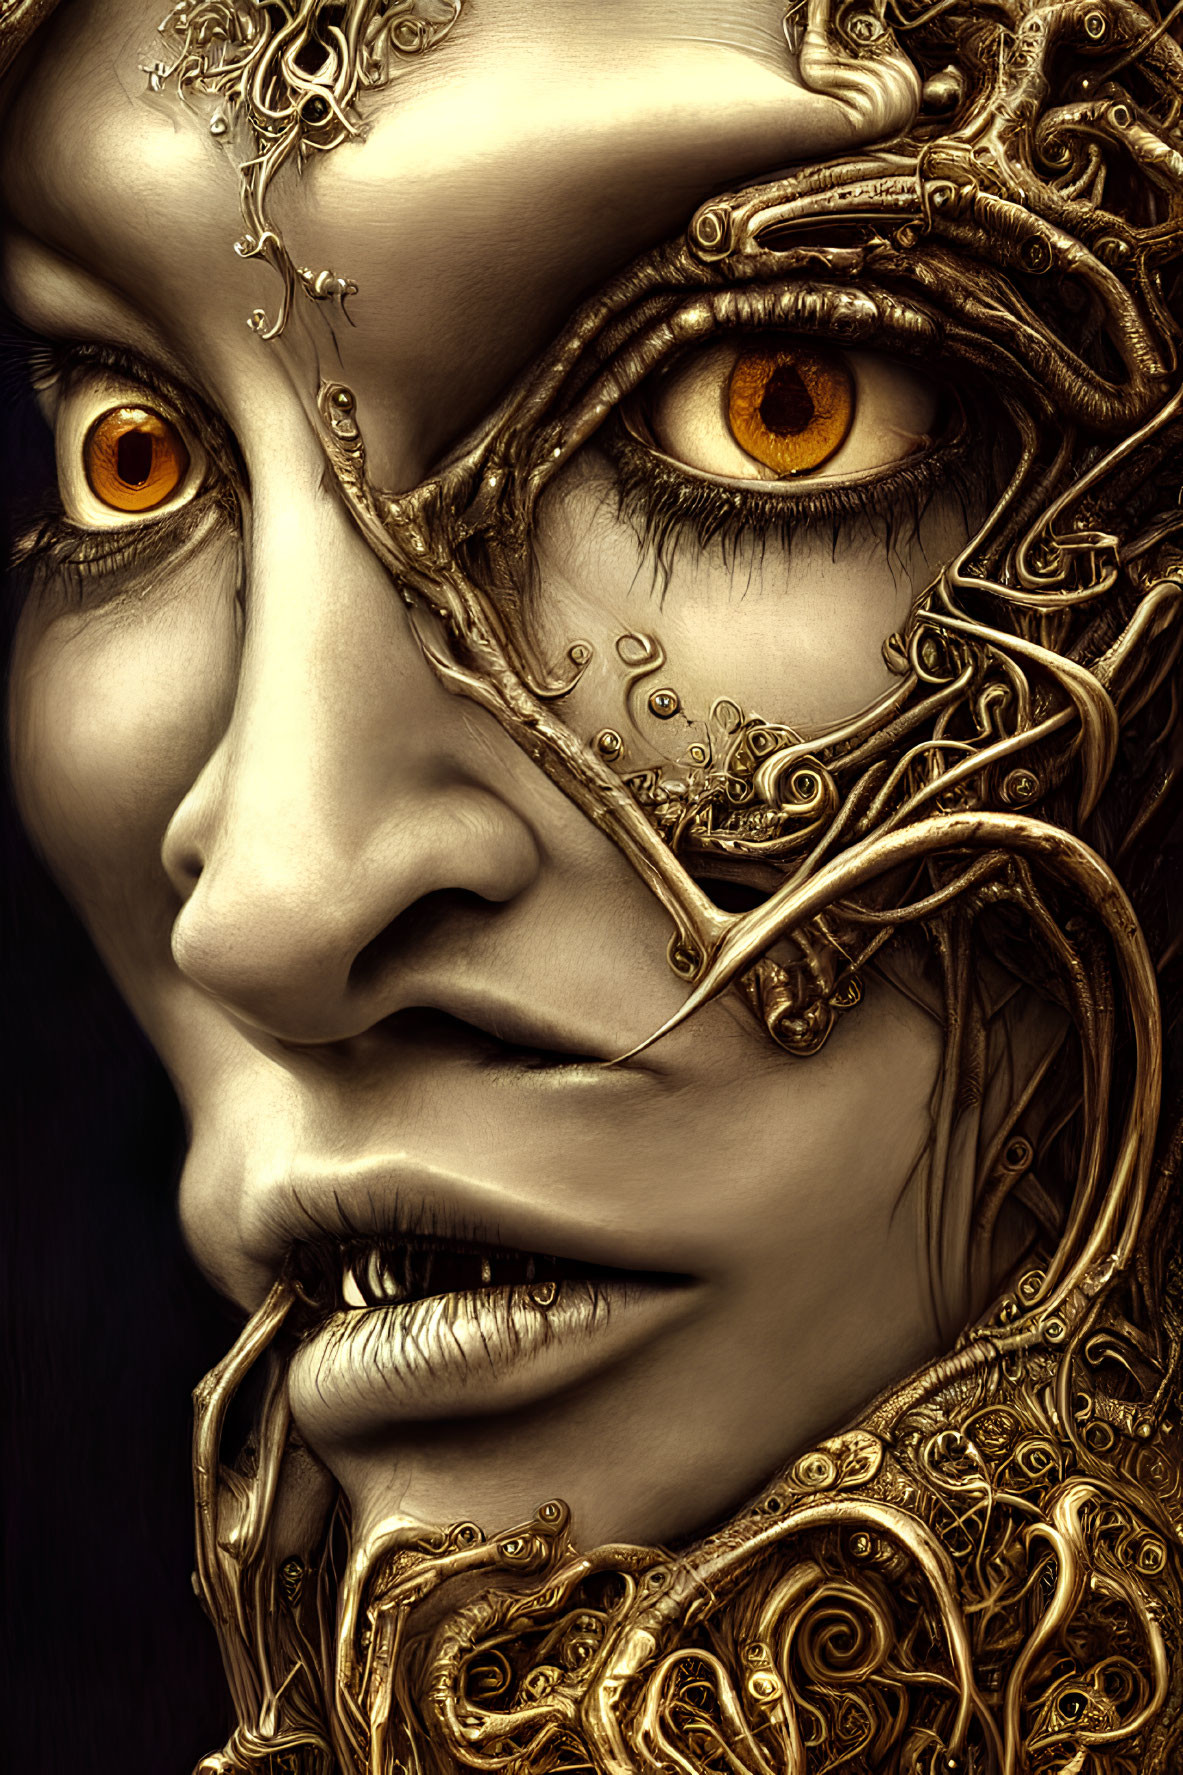 Detailed close-up of face with gold filigree, orange eyes, and human-machine fusion.